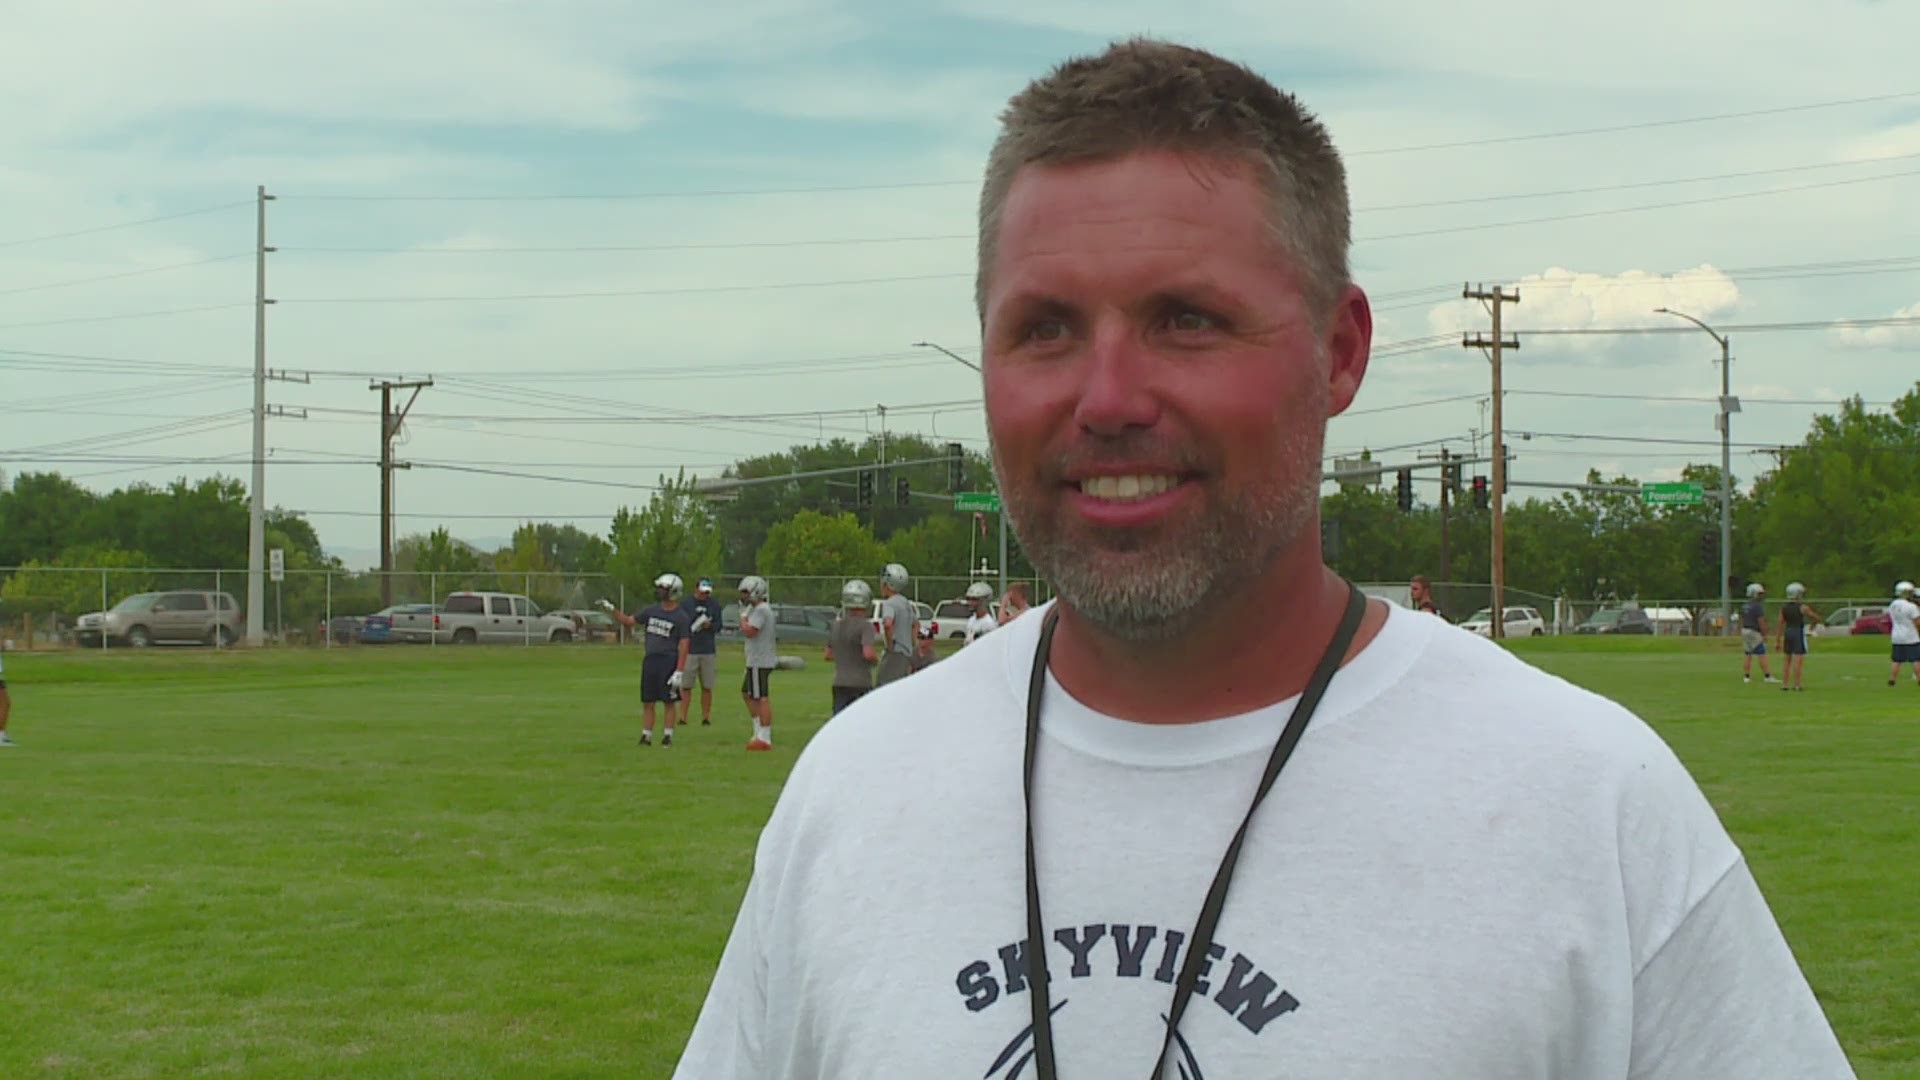 Skyview High School head football coach David Young talks with KTVB about the upcoming 2019 football season, and how the Hawks will look to replace players like runningback Tyler Crowe & QB Wyatt Storer.